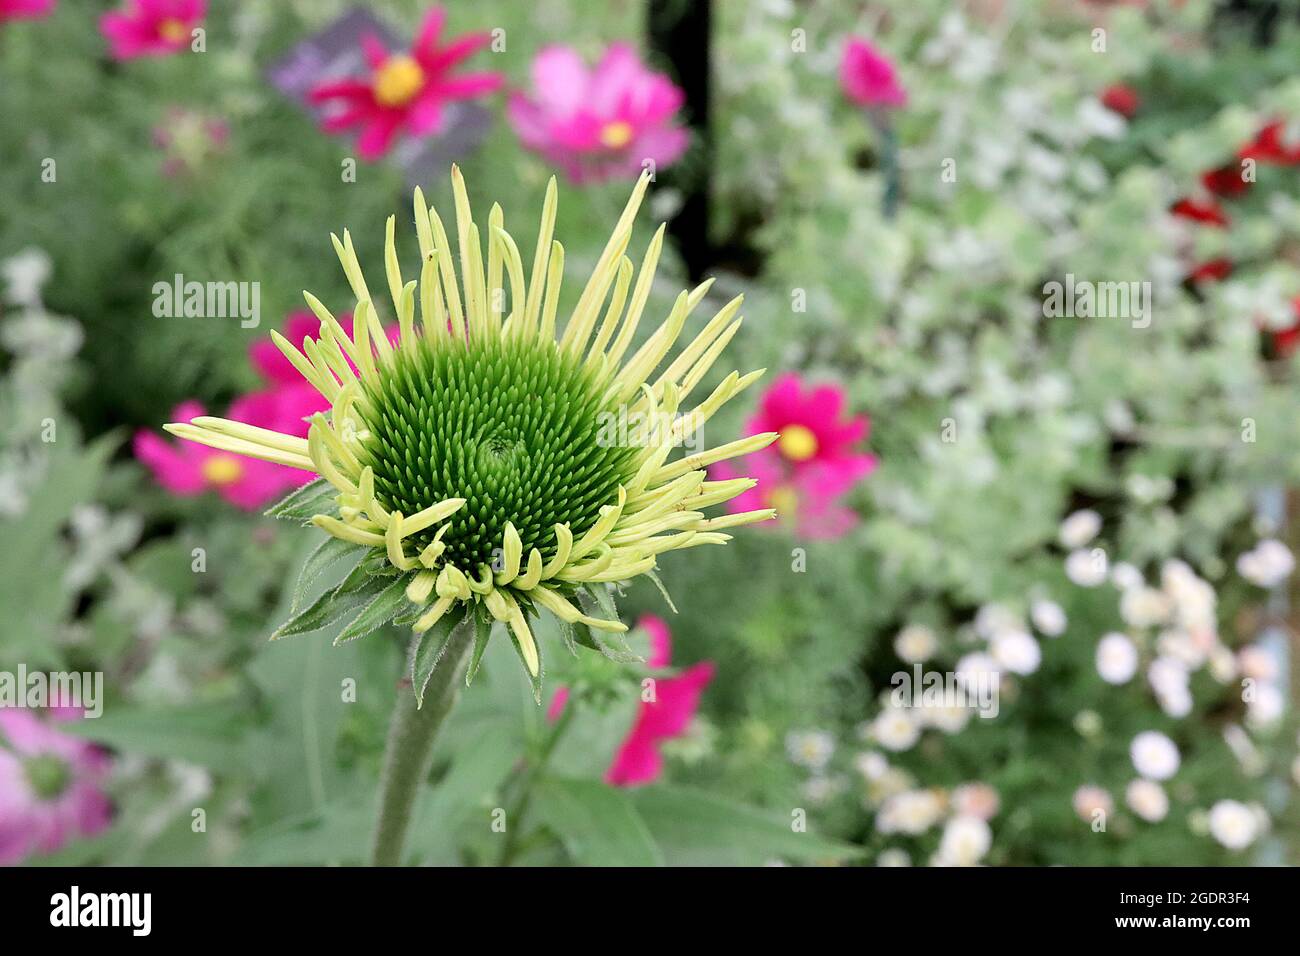 Echinacea purpurea ‘Yellow Pearl’ EMERGING PETALS coneflower Yellow Pearl – upright pale yellow petals and cone-shaped centre, July, England, UK Stock Photo